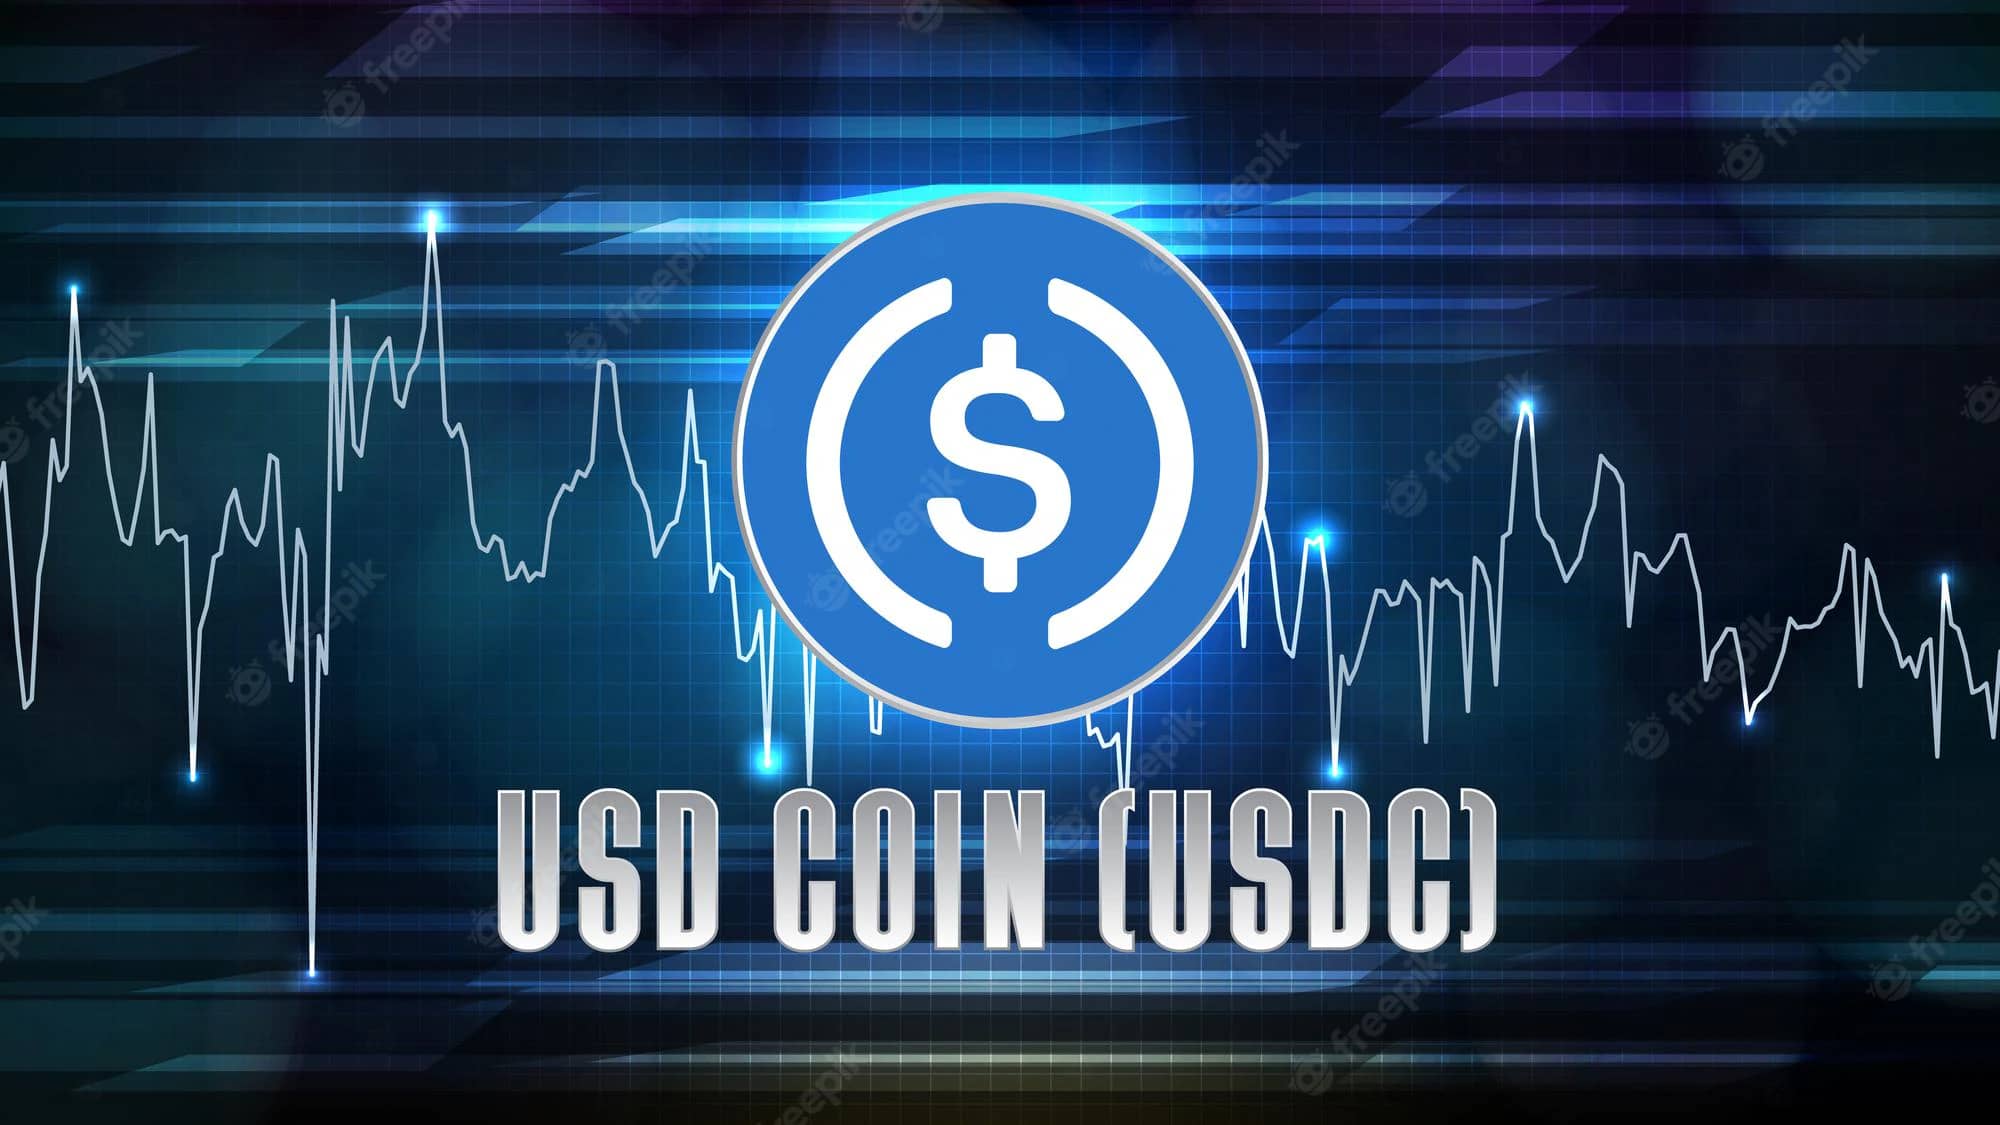 Learn More About USDC - CryptoCoinsTracker.com